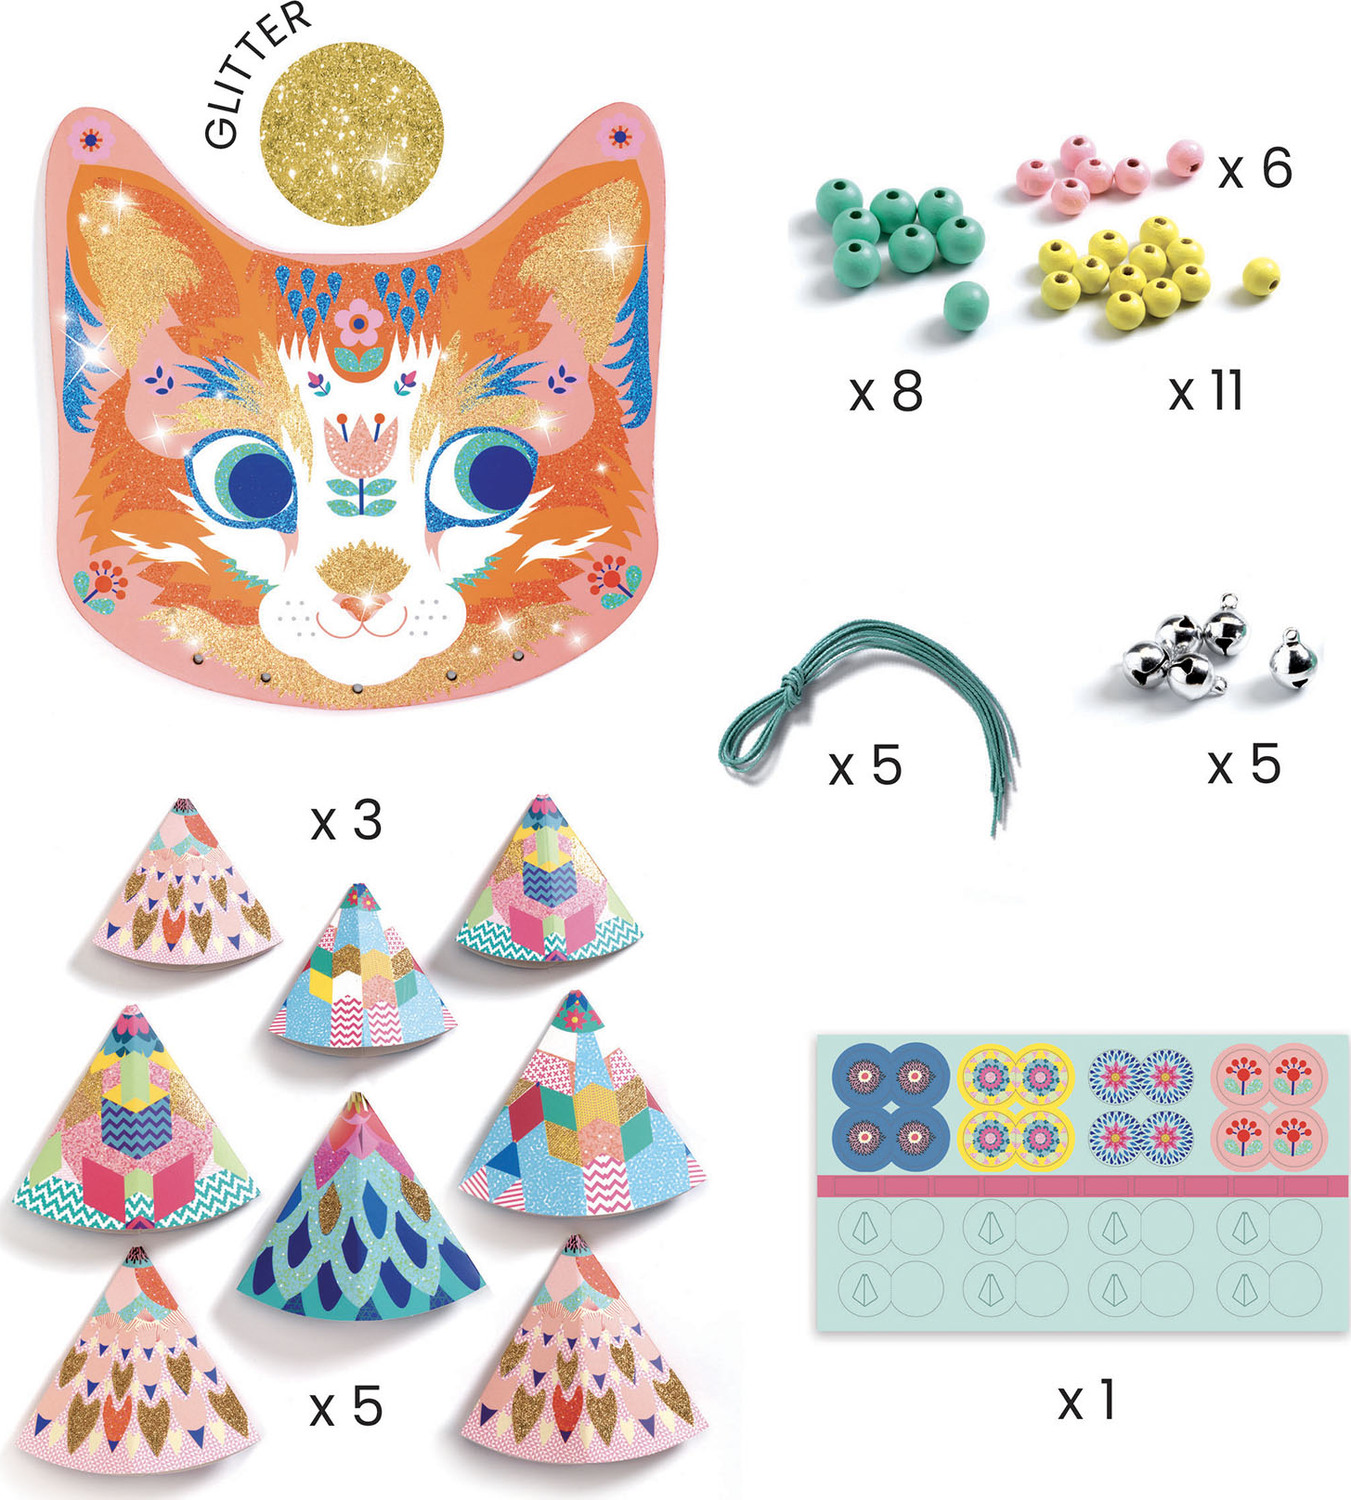 Kitty Diy Wind Chime Craft Kit The Toy Box Hanover 